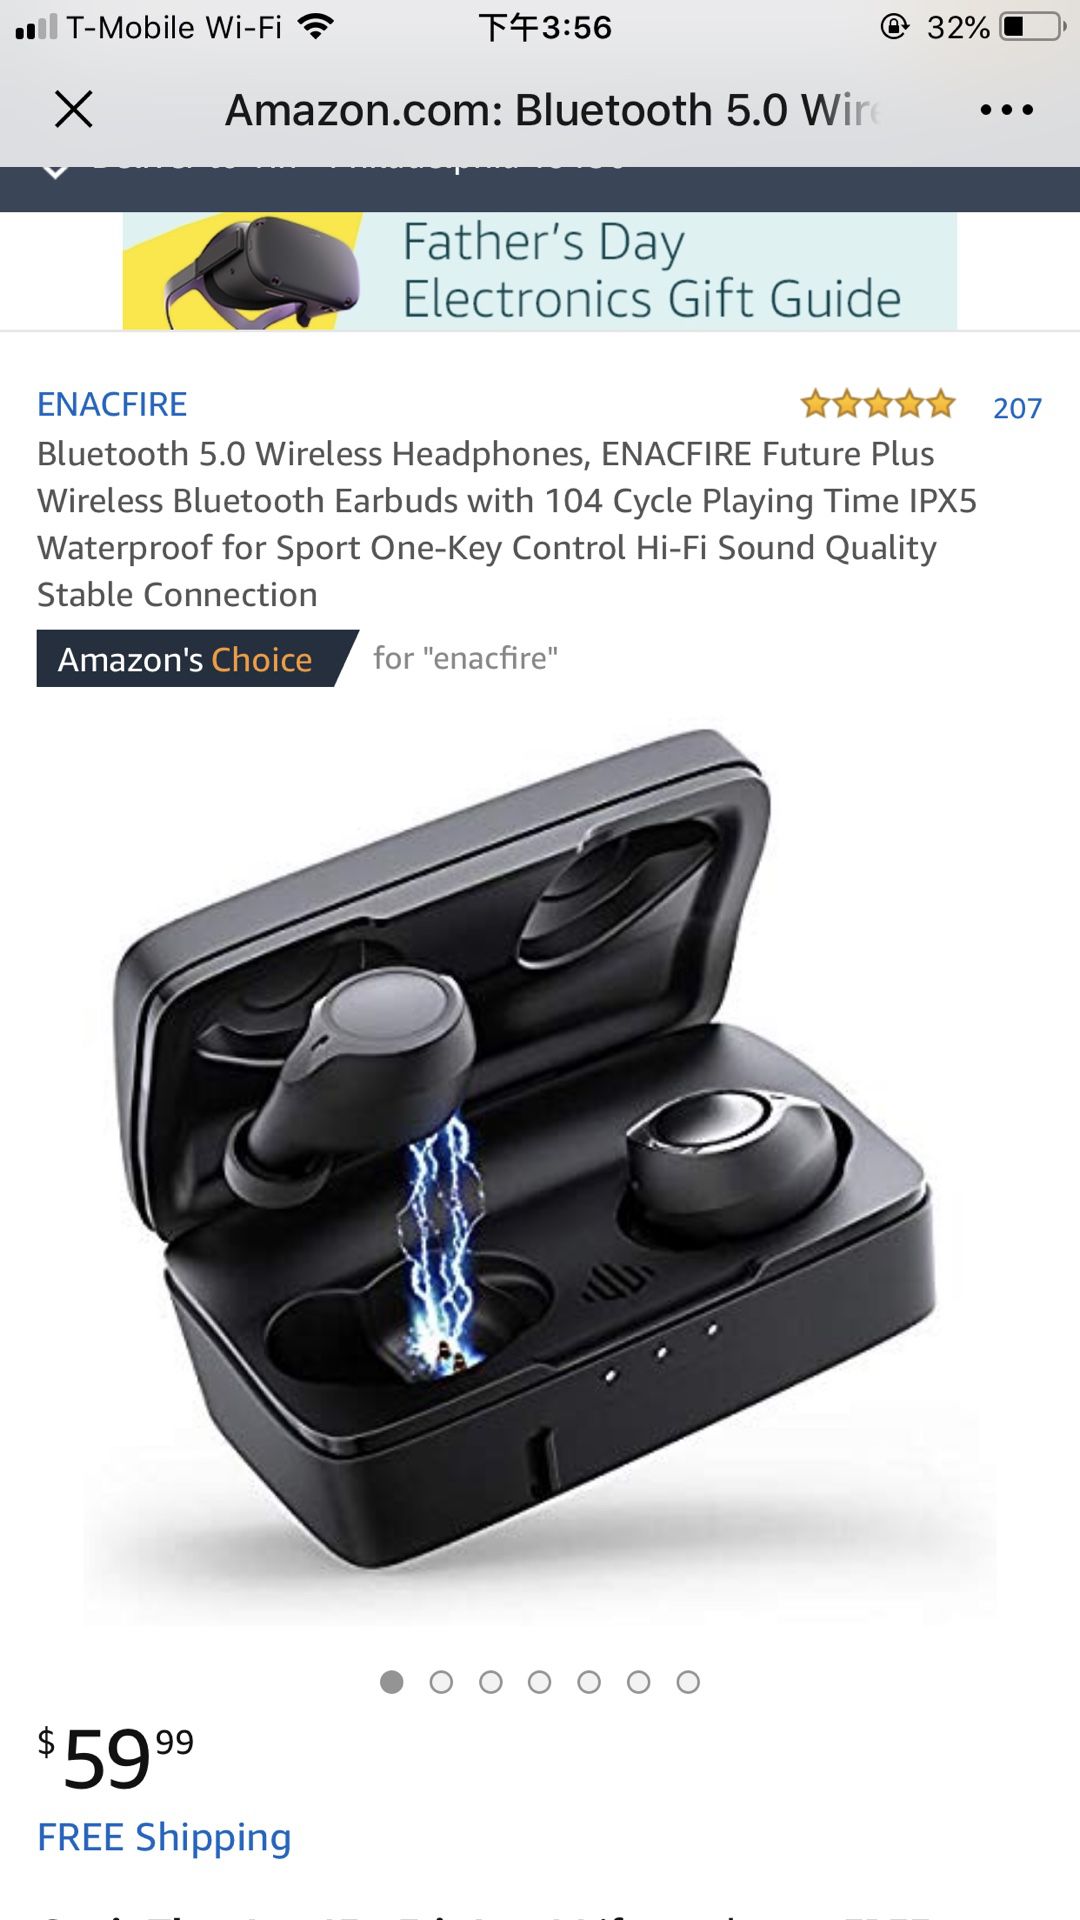 Bluetooth 5.0 Wireless Headphones, ENACFIRE Future Plus Wireless Bluetooth Earbuds with 104 Cycle Playing Time IPX5 Waterproof for Sport One-Key Cont